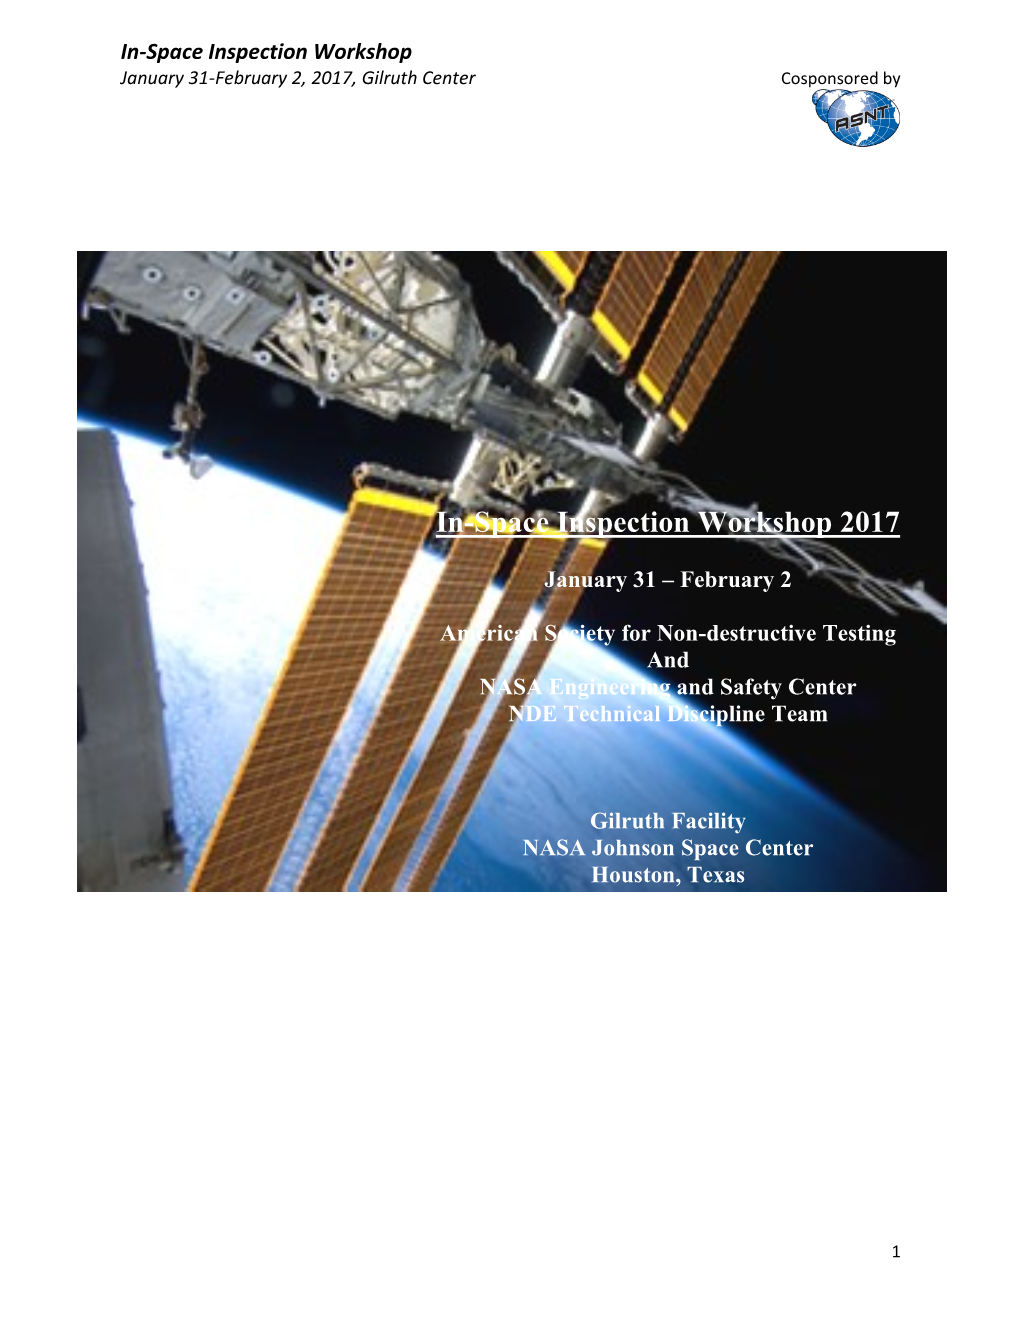 In-Space Inspection Workshop 2017